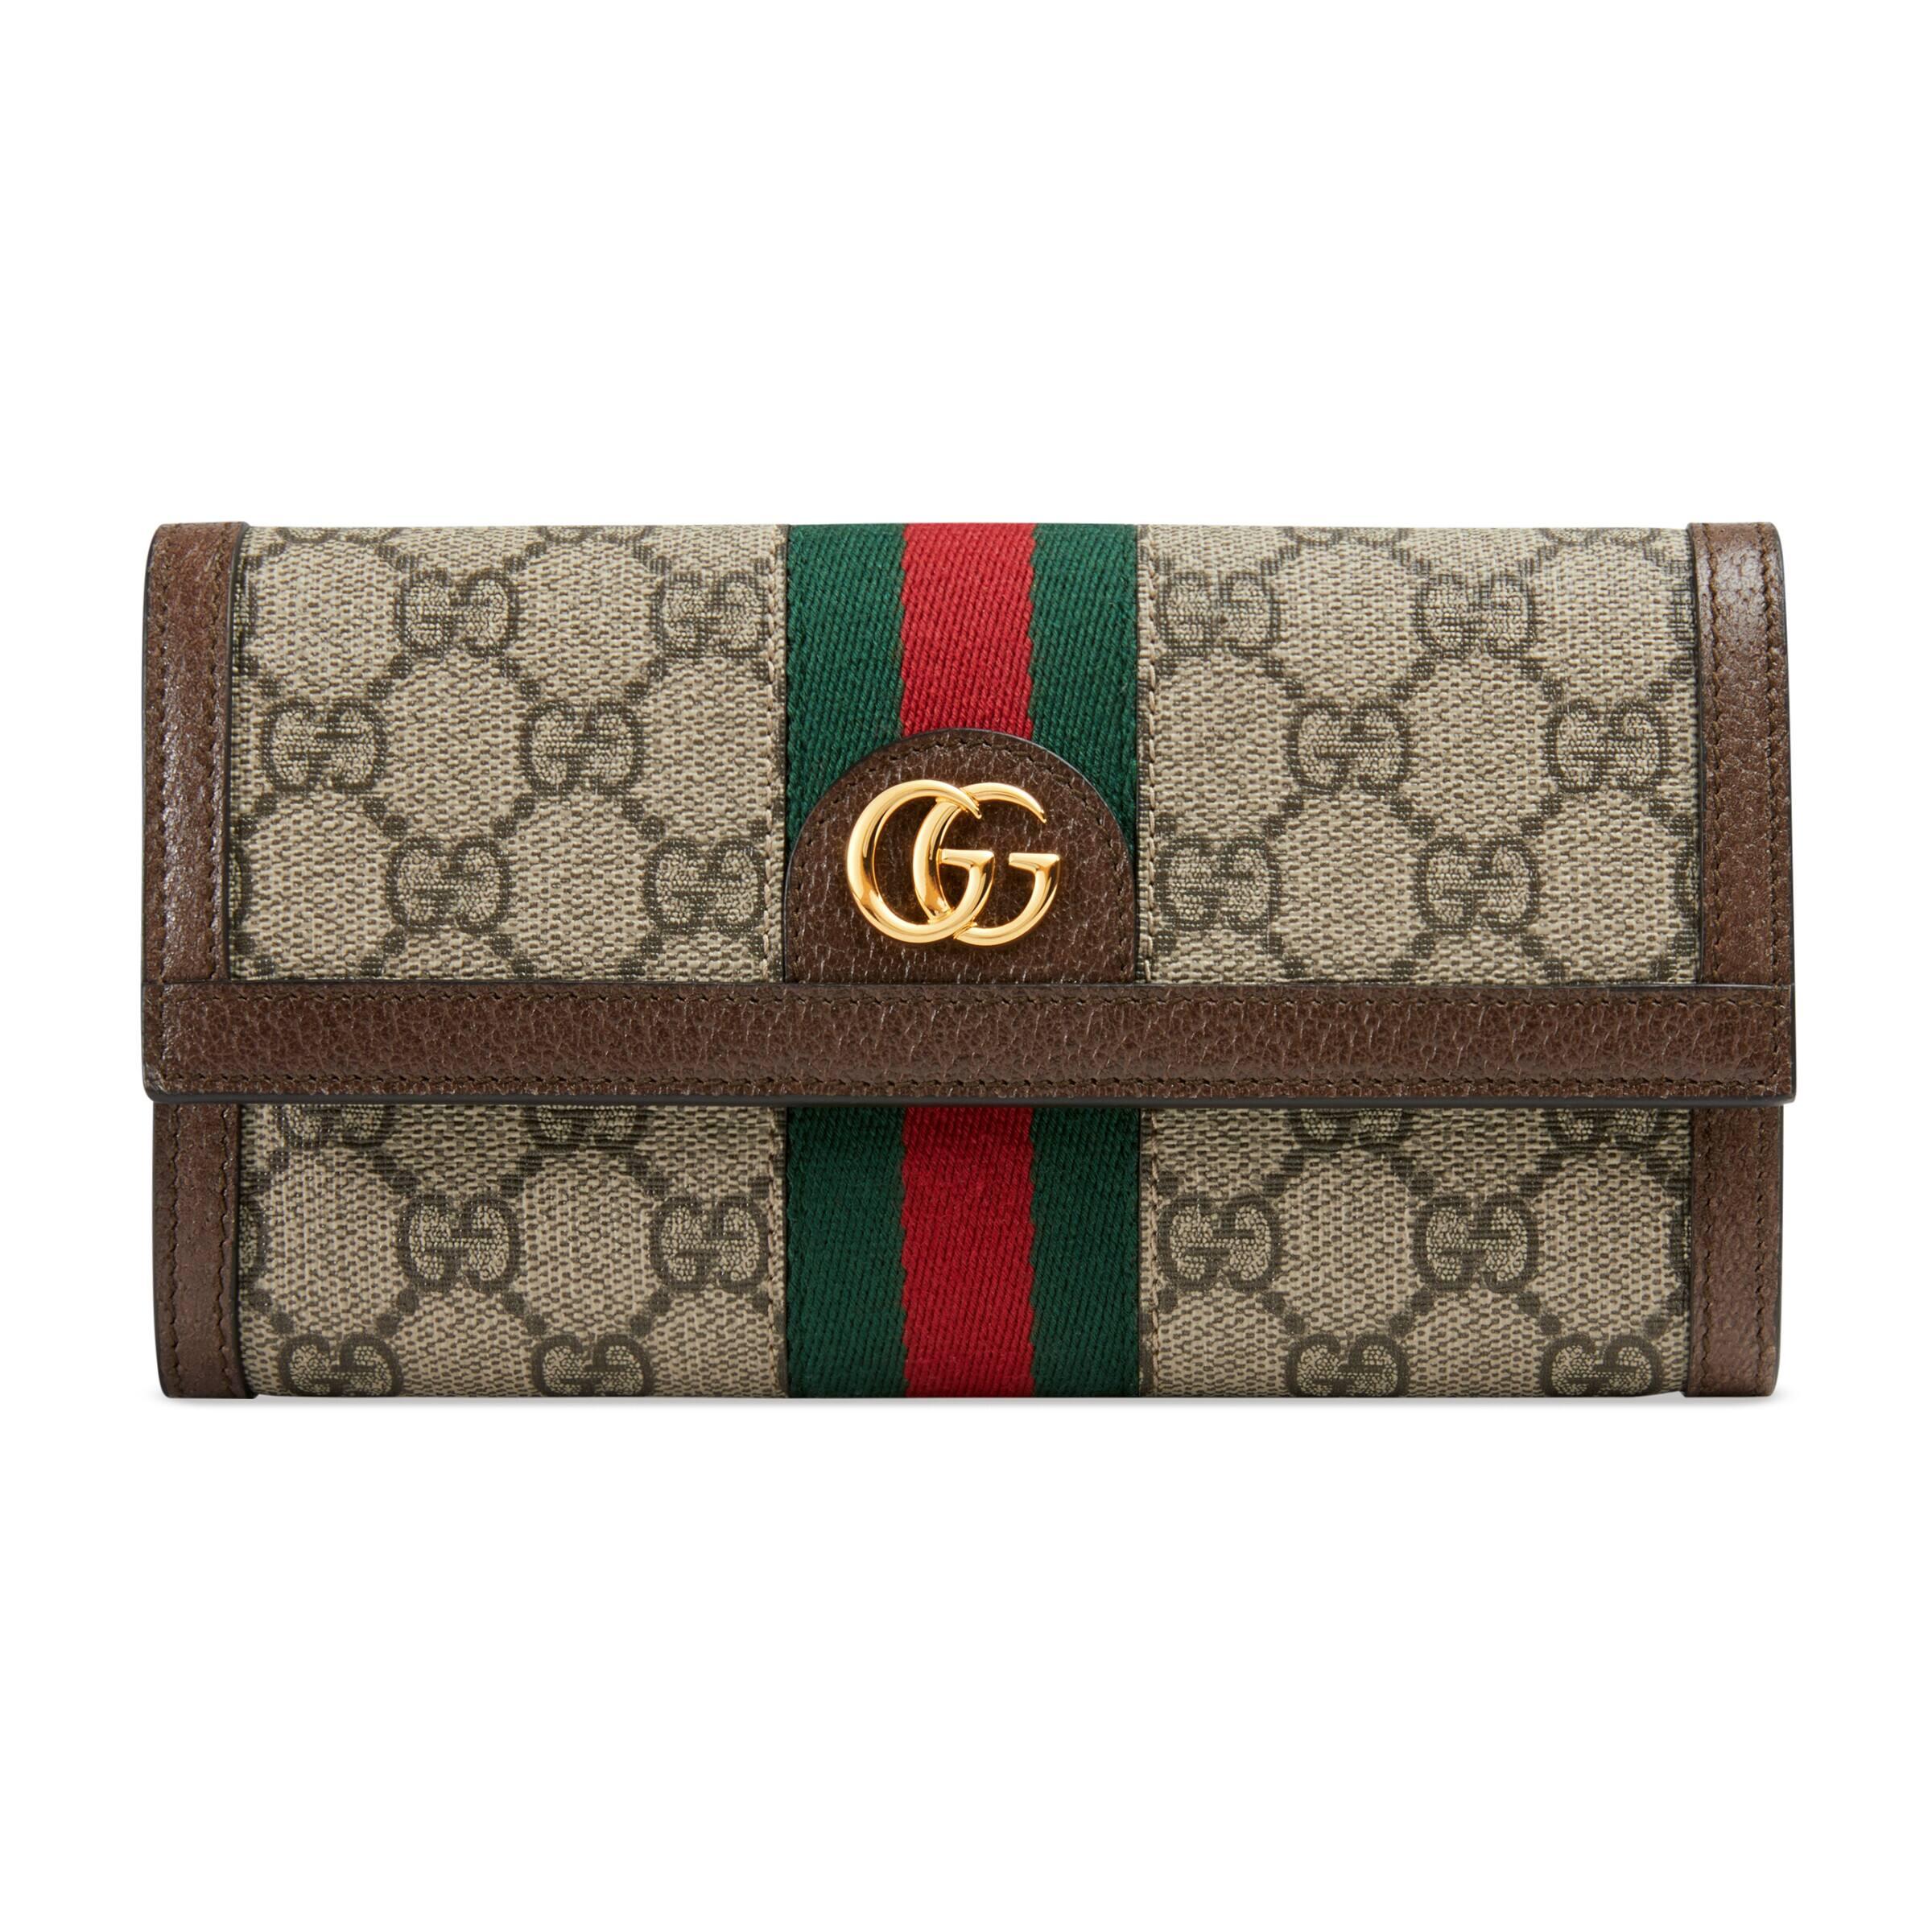 Gucci Canvas Ophidia gg Continental Wallet in Brown - Save 14% - Lyst